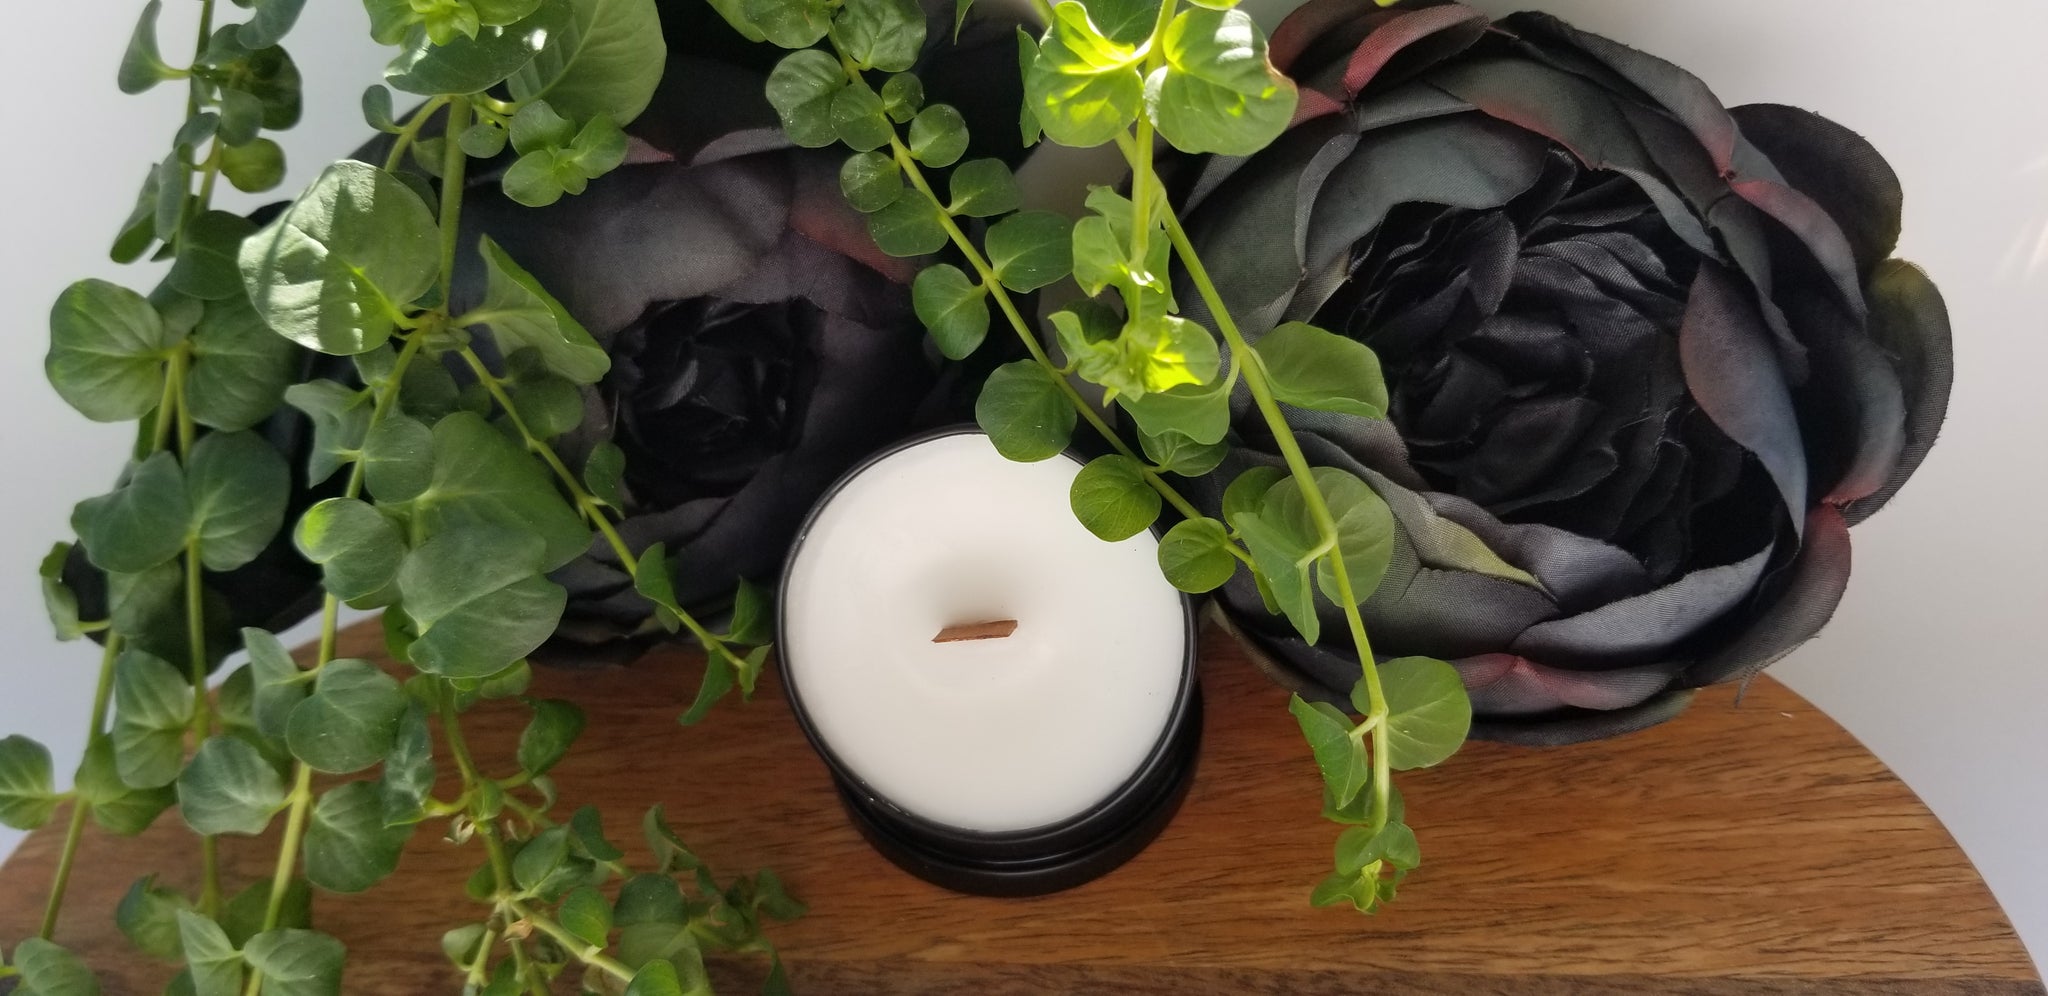 WoodWick Candle Review: Sweet Candle Scent